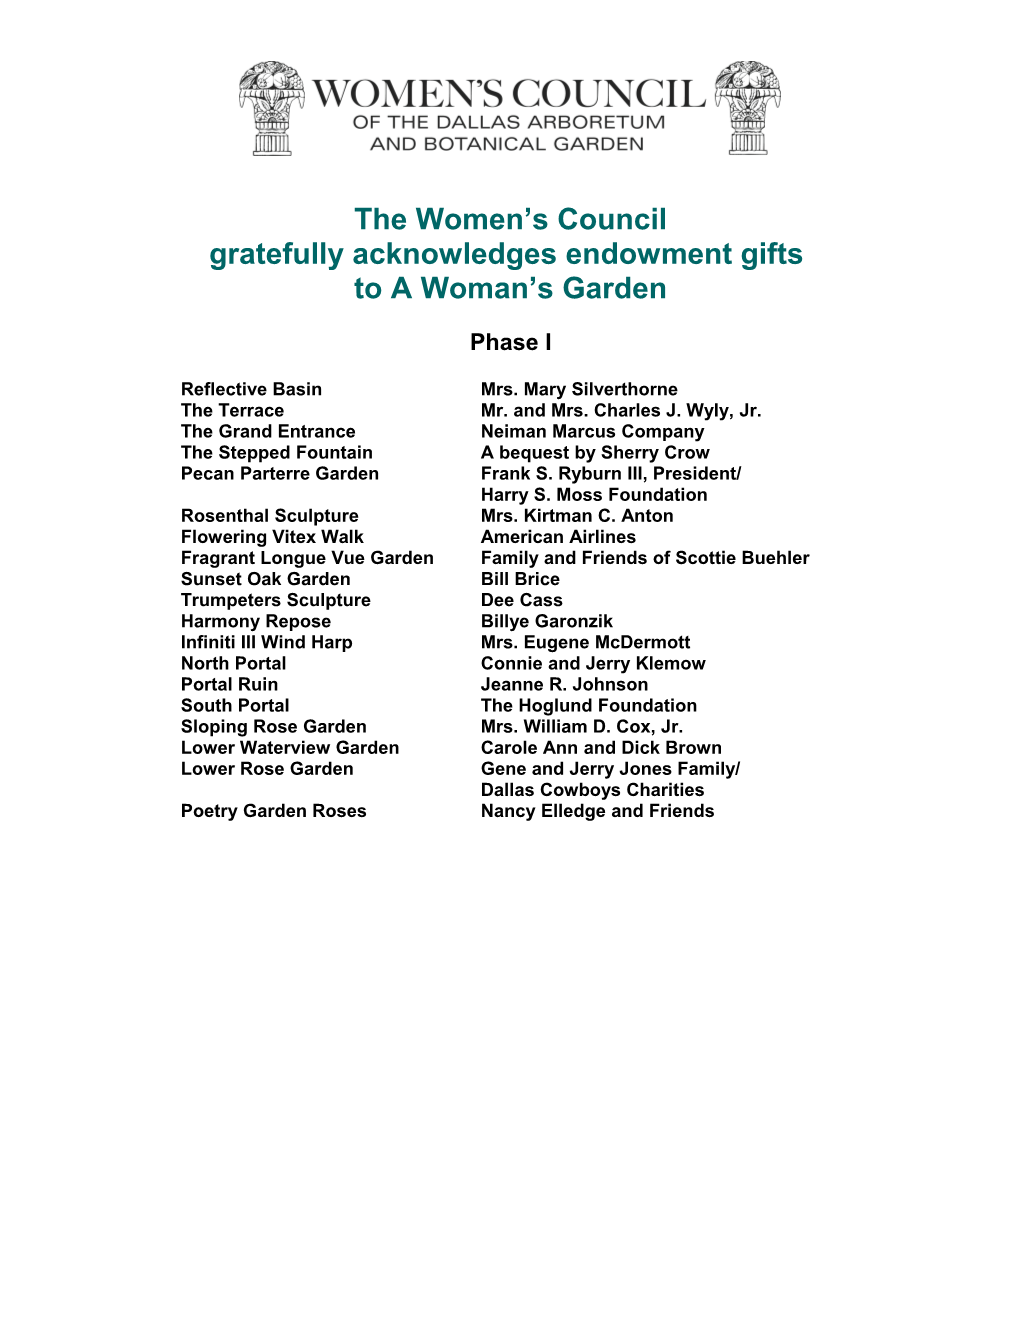 The Women S Council Gratefully Acknowledges Endowment Gifts to a Woman S Garden